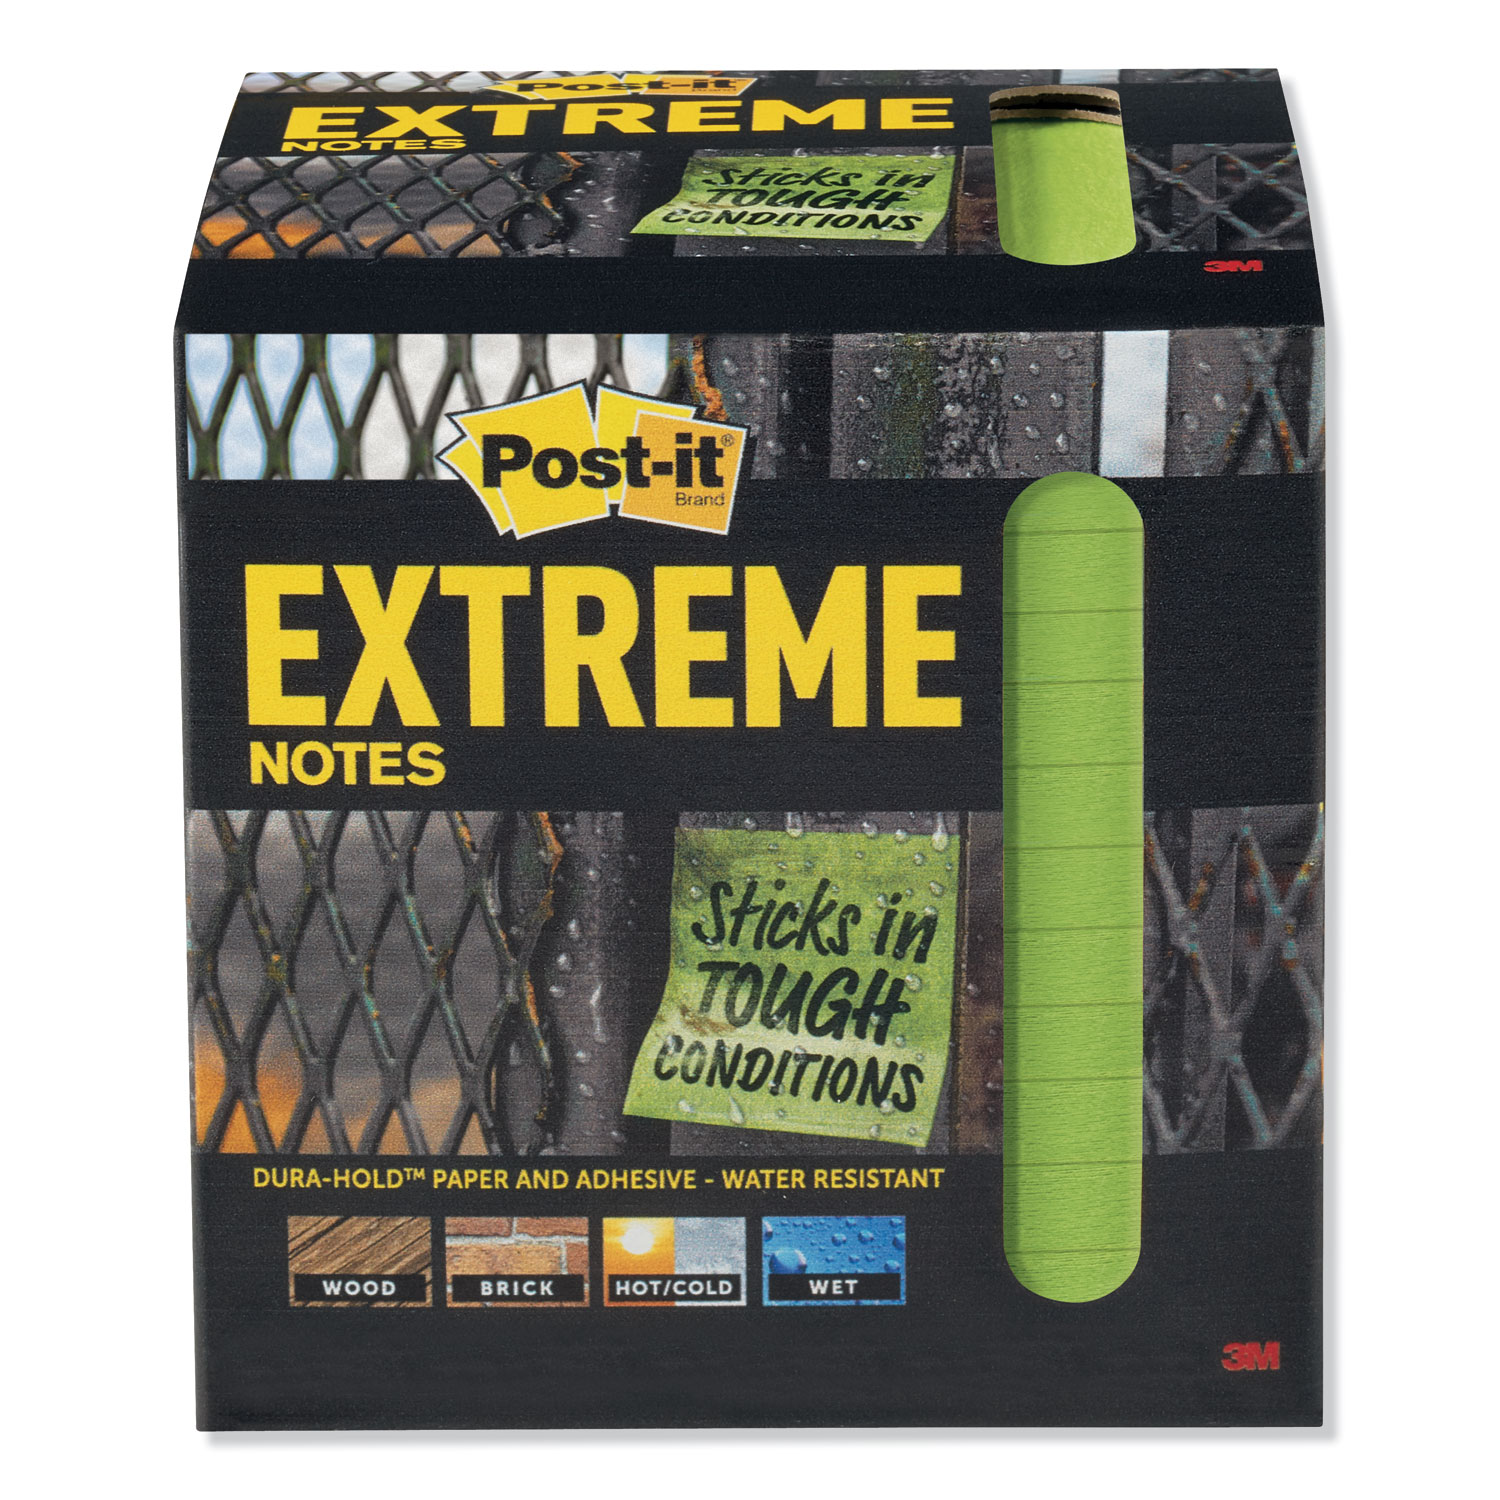  Post-it Extreme Notes XTRM3312TRYG Water-Resistant Self-Stick Notes, Green, 3 x 3, 45 Sheets, 12/Pack (MMMXTRM3312TRYG) 